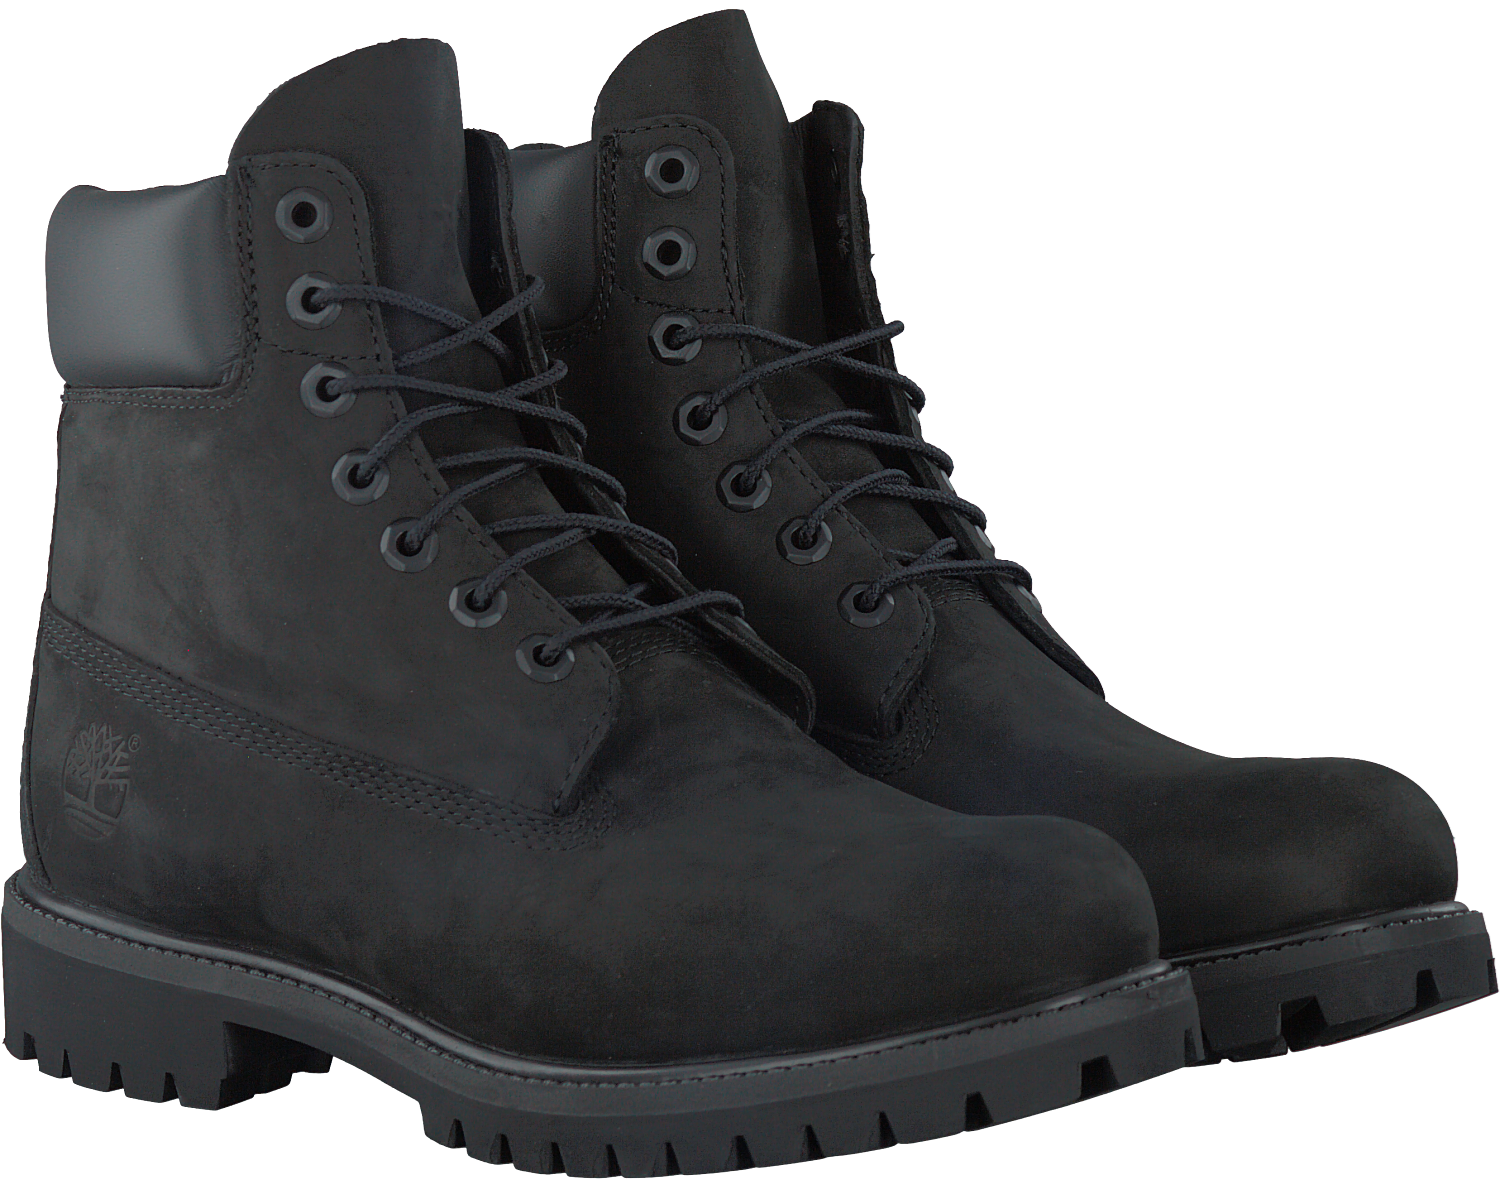 Pair Of Black Boots PNG HD Quality